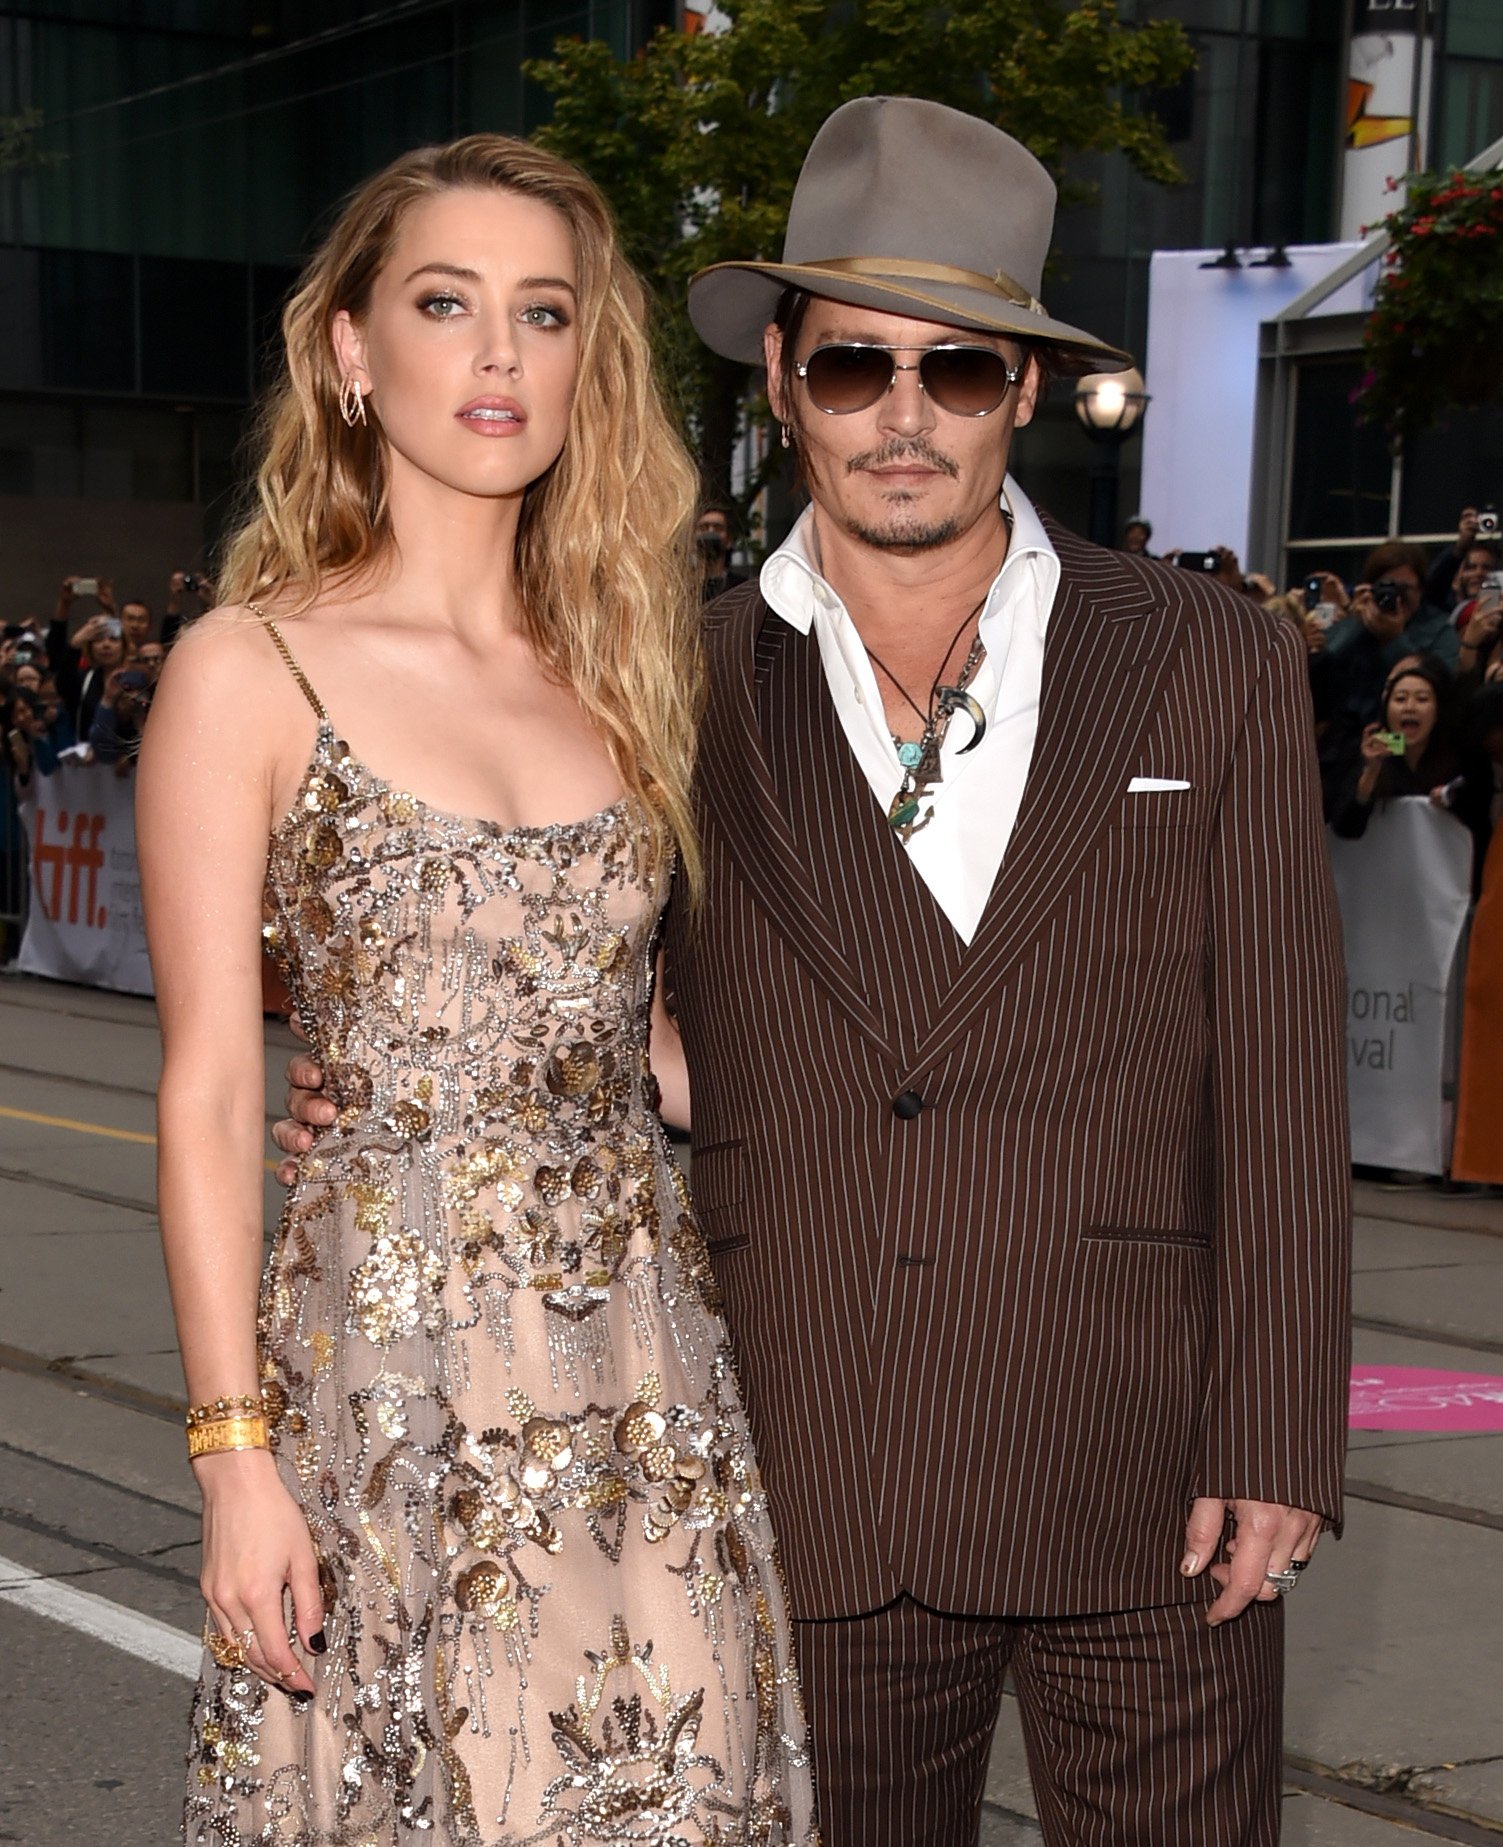 Amber Heard and Johnny Depp at the "The Danish Girl" premiere at the Toronto International Film Festival on September 12, 2015, in Toronto, Canada. | Source:Getty Images